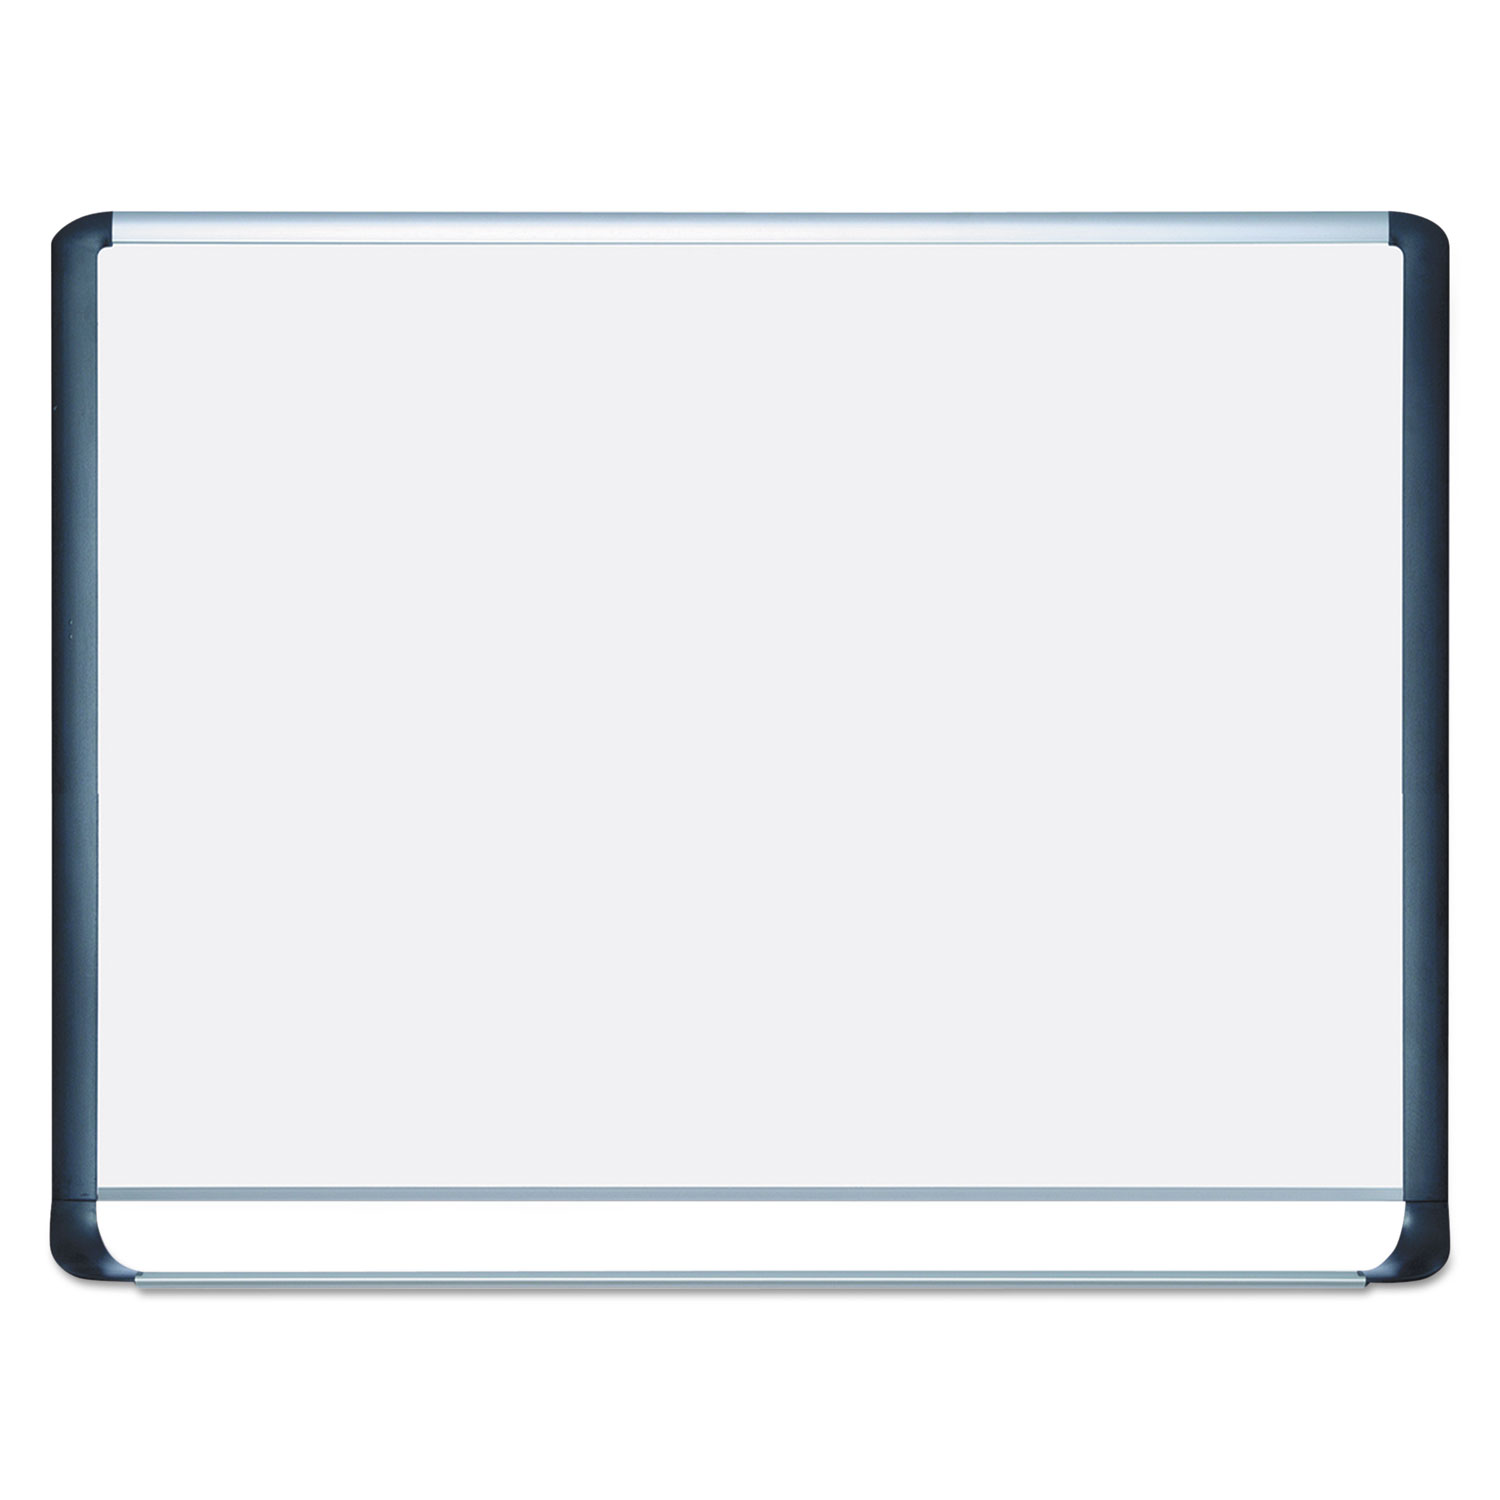 Porcelain Magnetic Dry Erase Board, 29.5 x 48, White/Silver